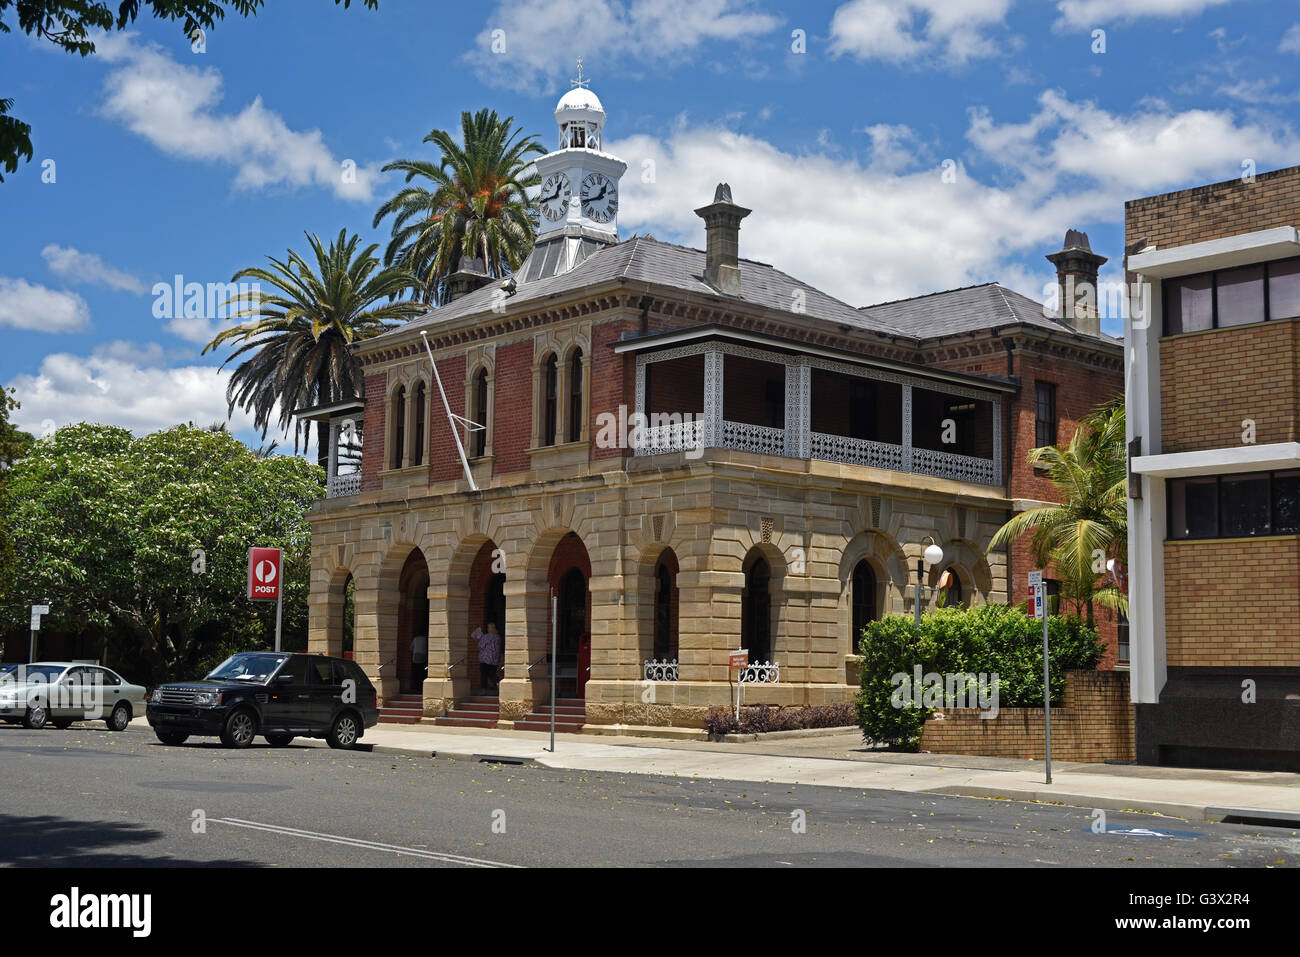 the front street view of the historic grafton post office in new south wales australia Stock Photo